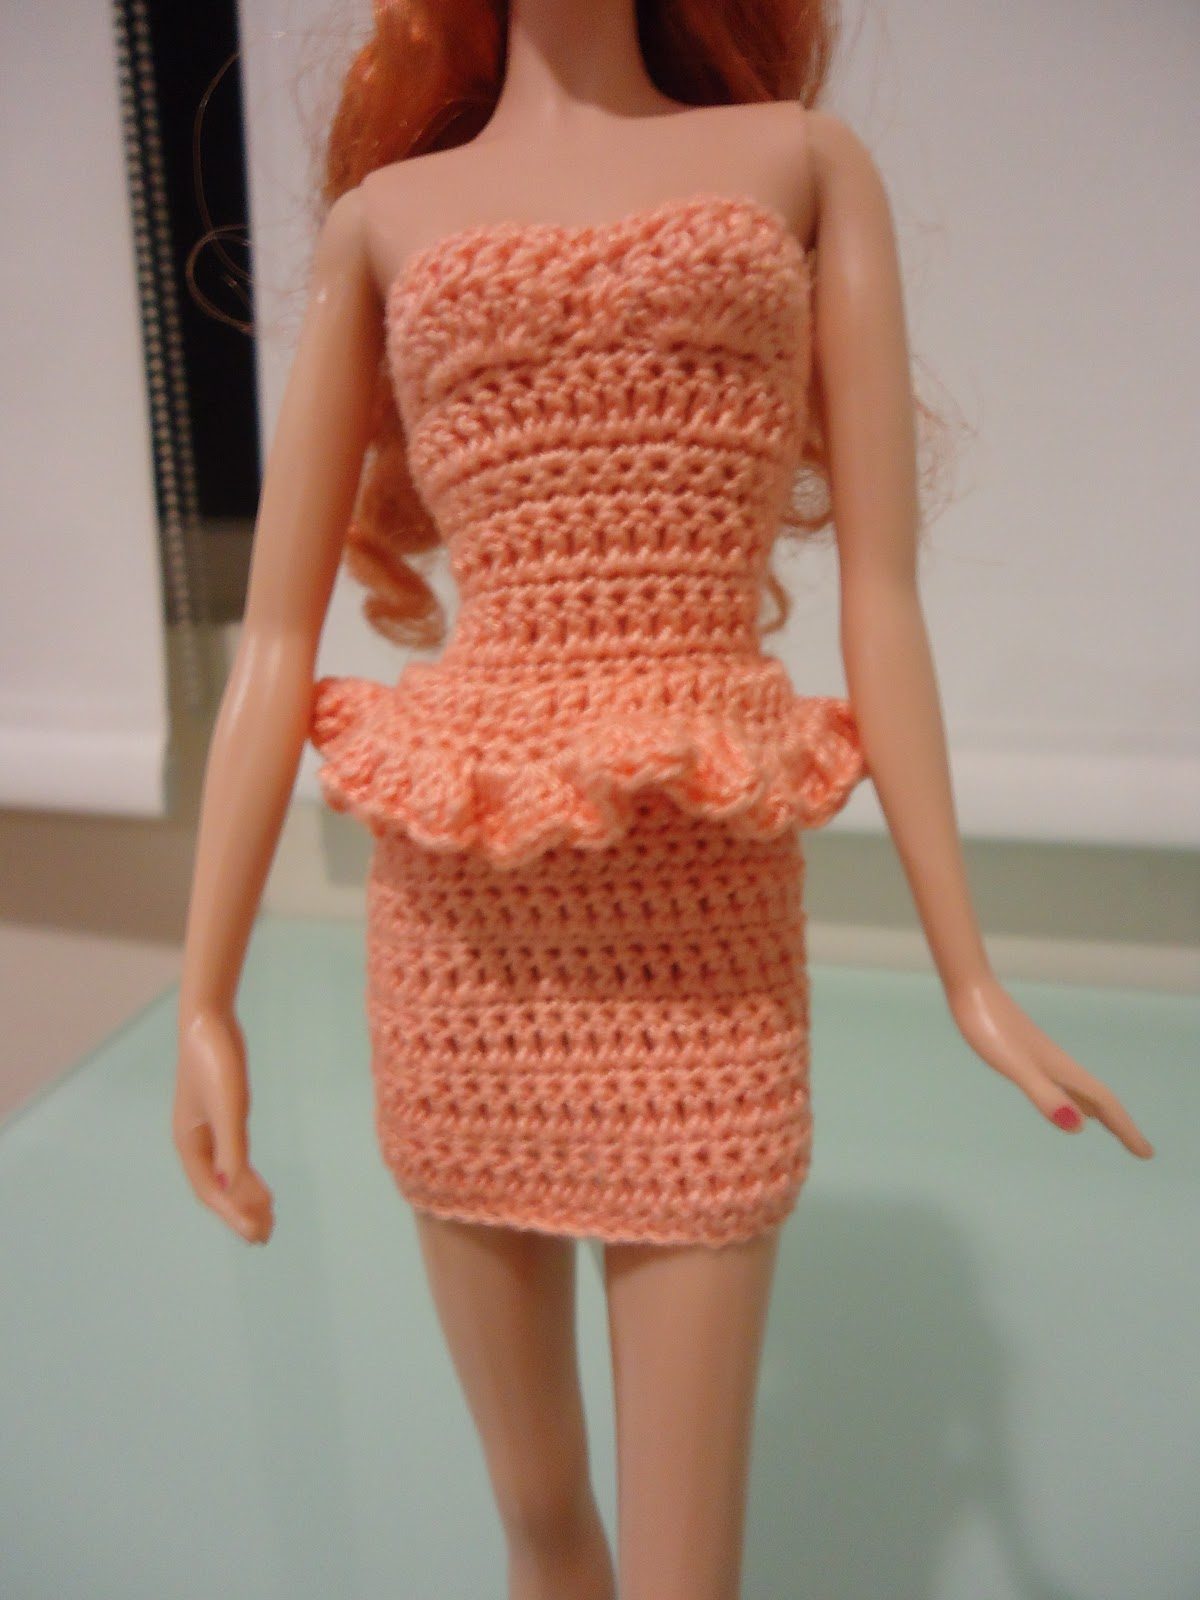 Crochet Doll Dress Patterns For Barbies Fashion Doll Crochet Clothes Simple Peach Bodycon Turned Peplum Dress